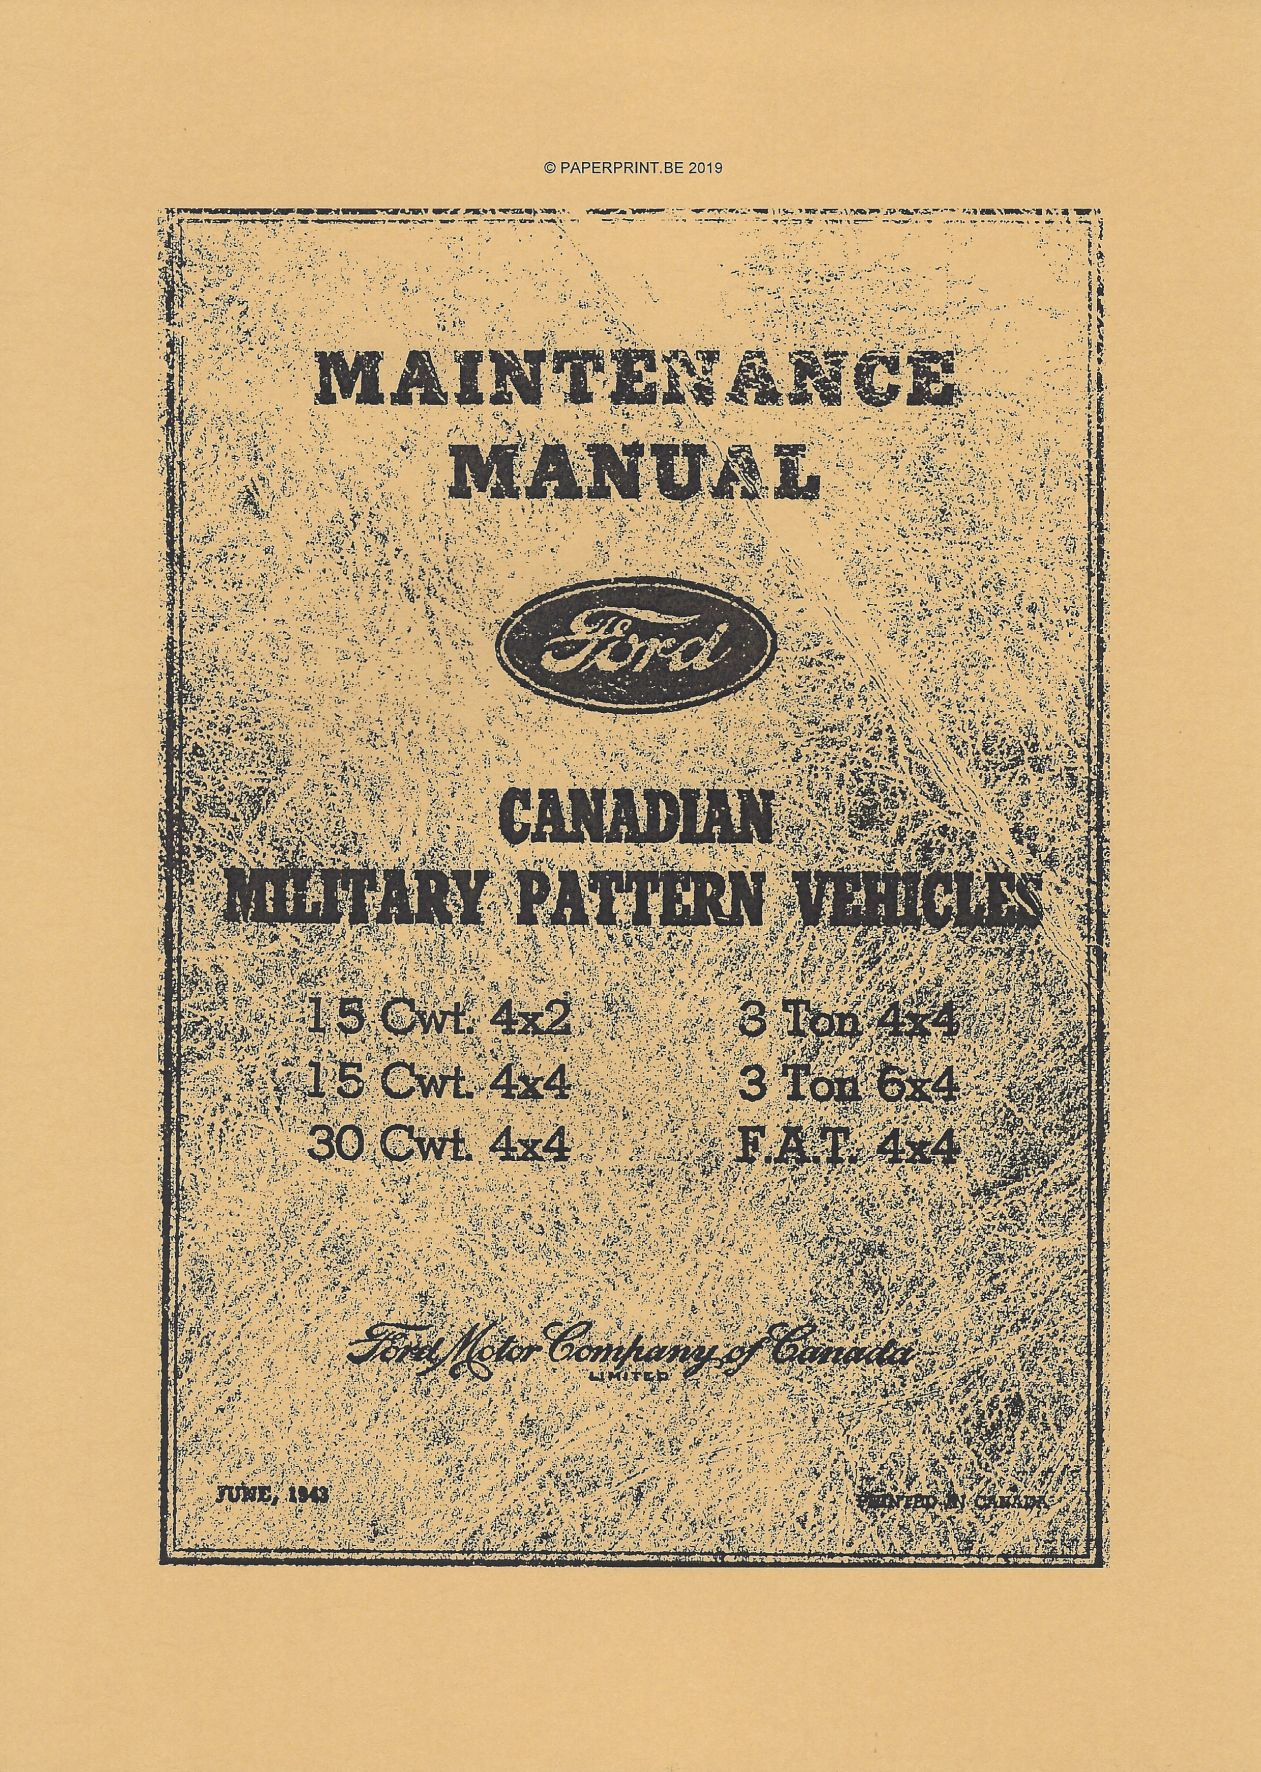 MB-F1 FORD CANADIAN MILITARY PATTERN MAINTENANCE MANUAL